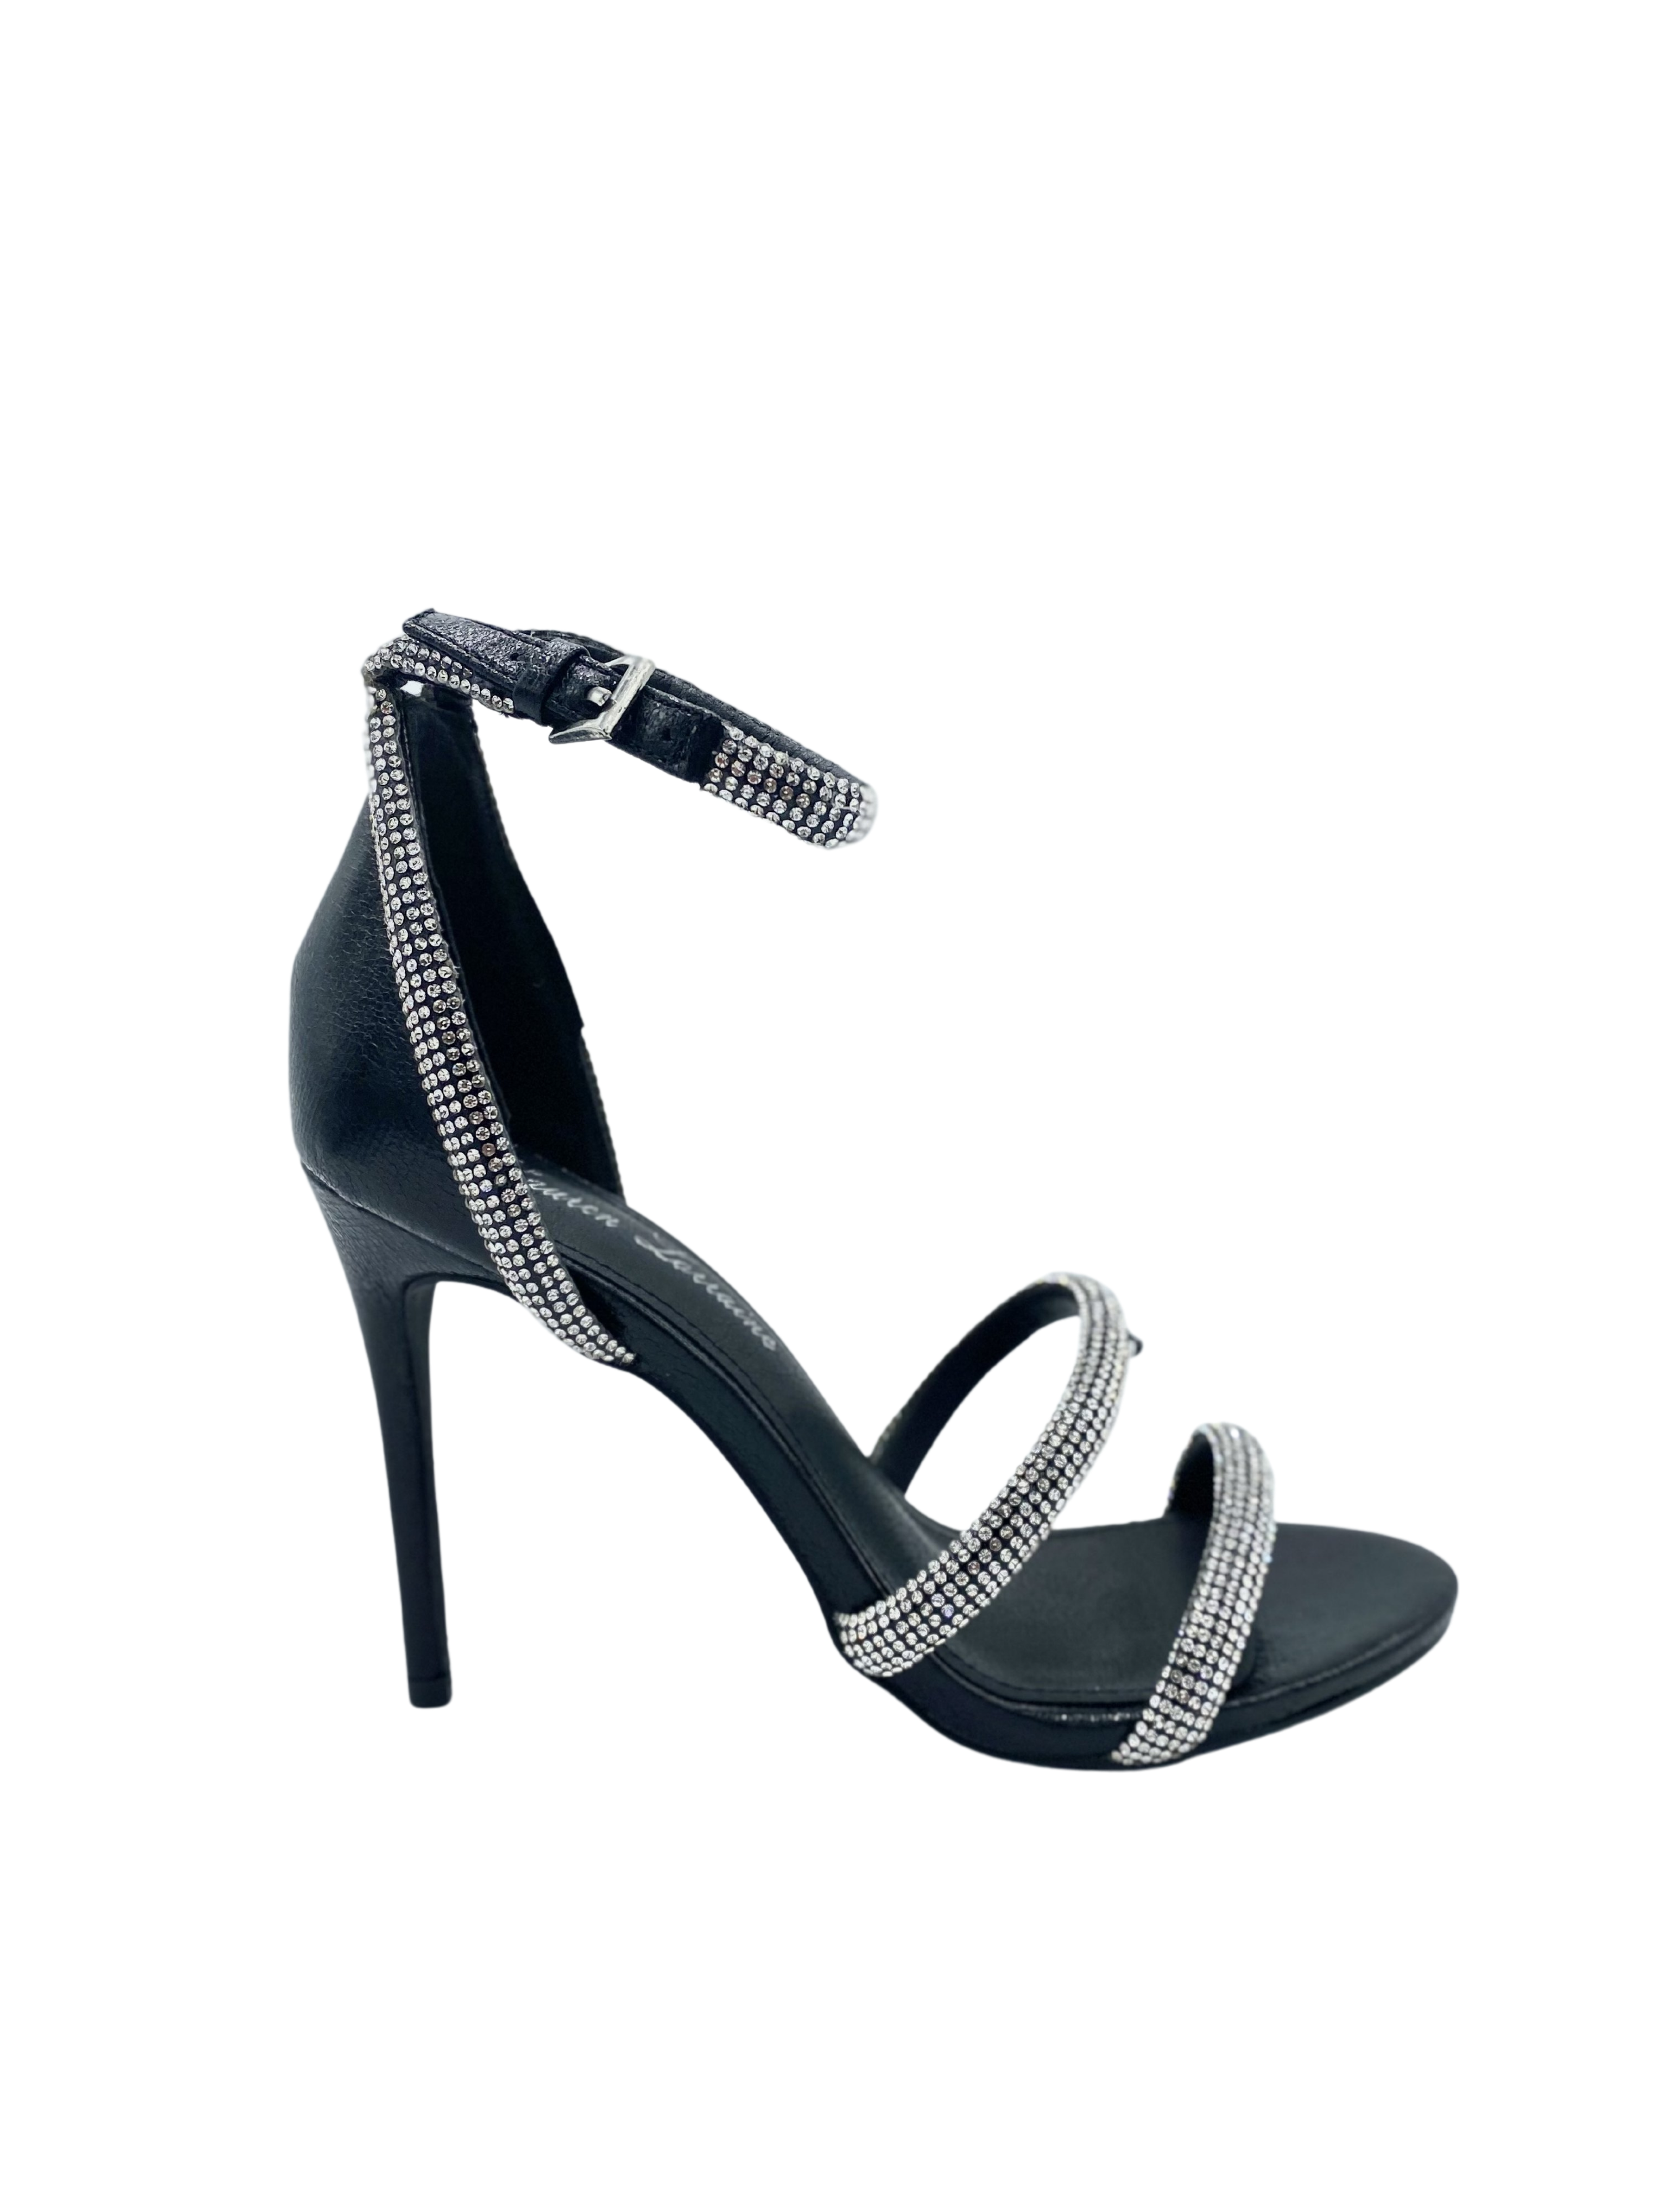 DRIA HIGH HEEL ANKLE STRAP OPEN TOE SANDAL WITH CRYSTAL DETAILING